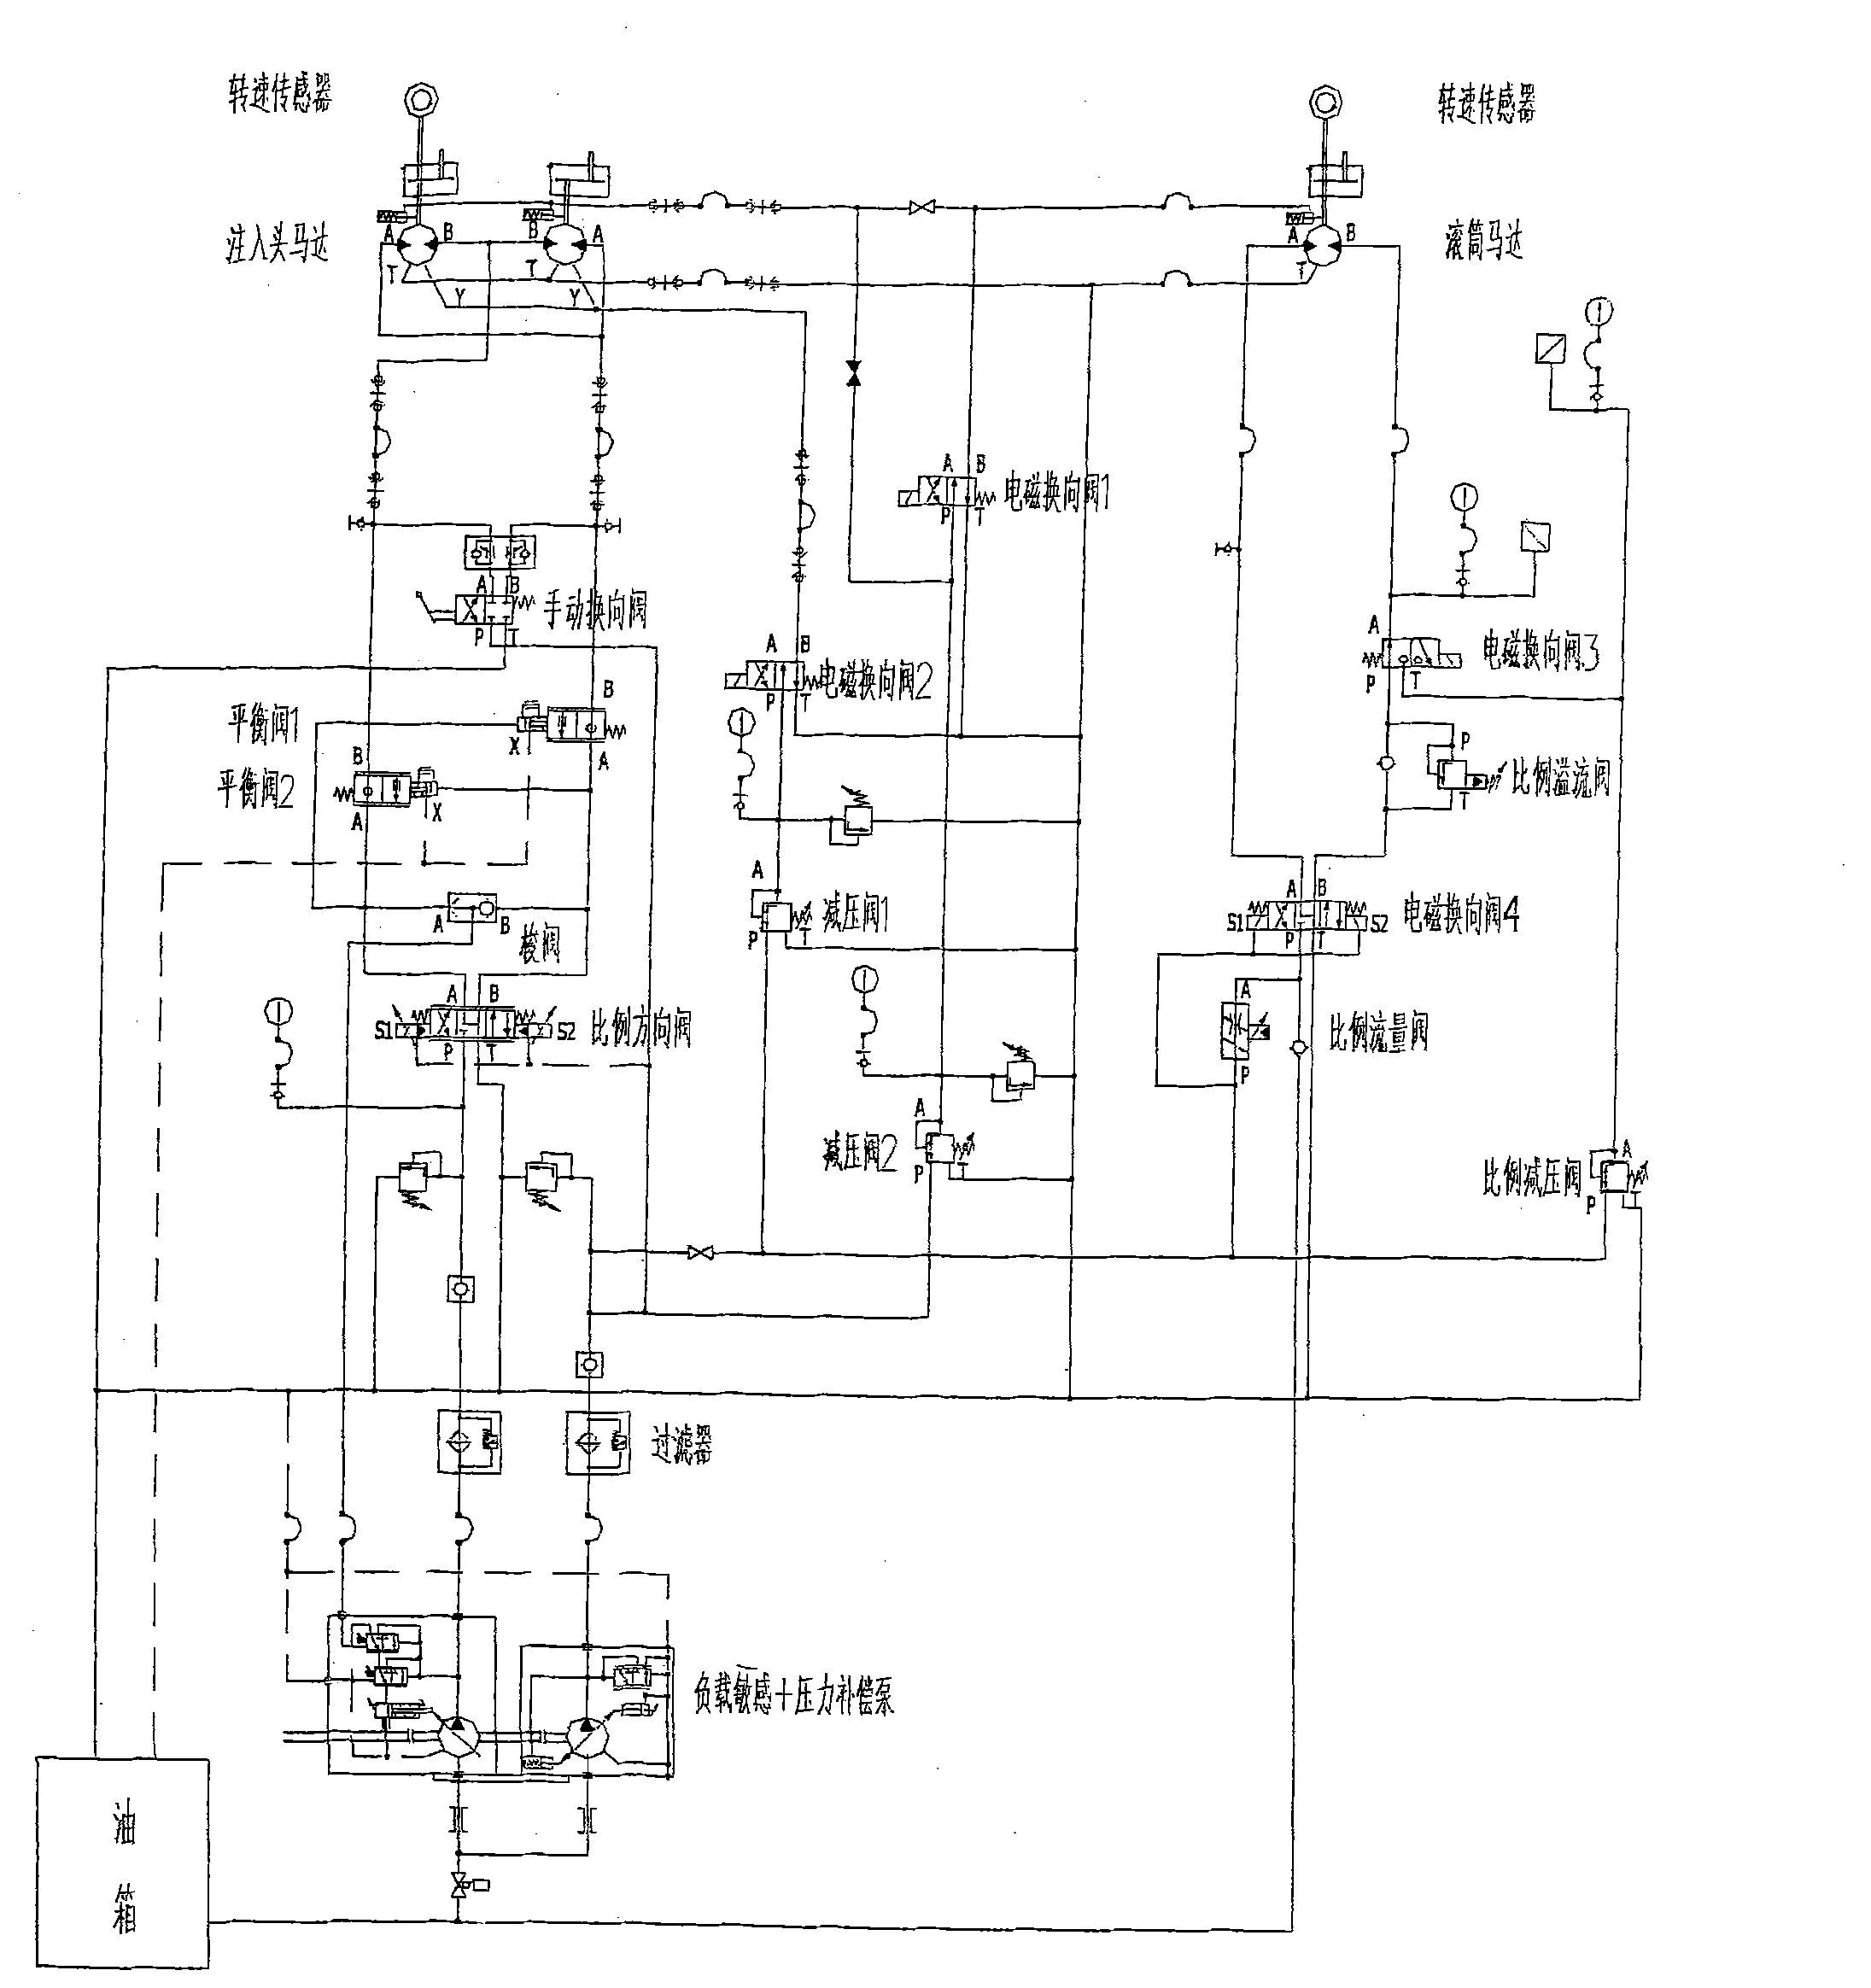 Speed matching control device between continuous tube apparatus infusion head and drum